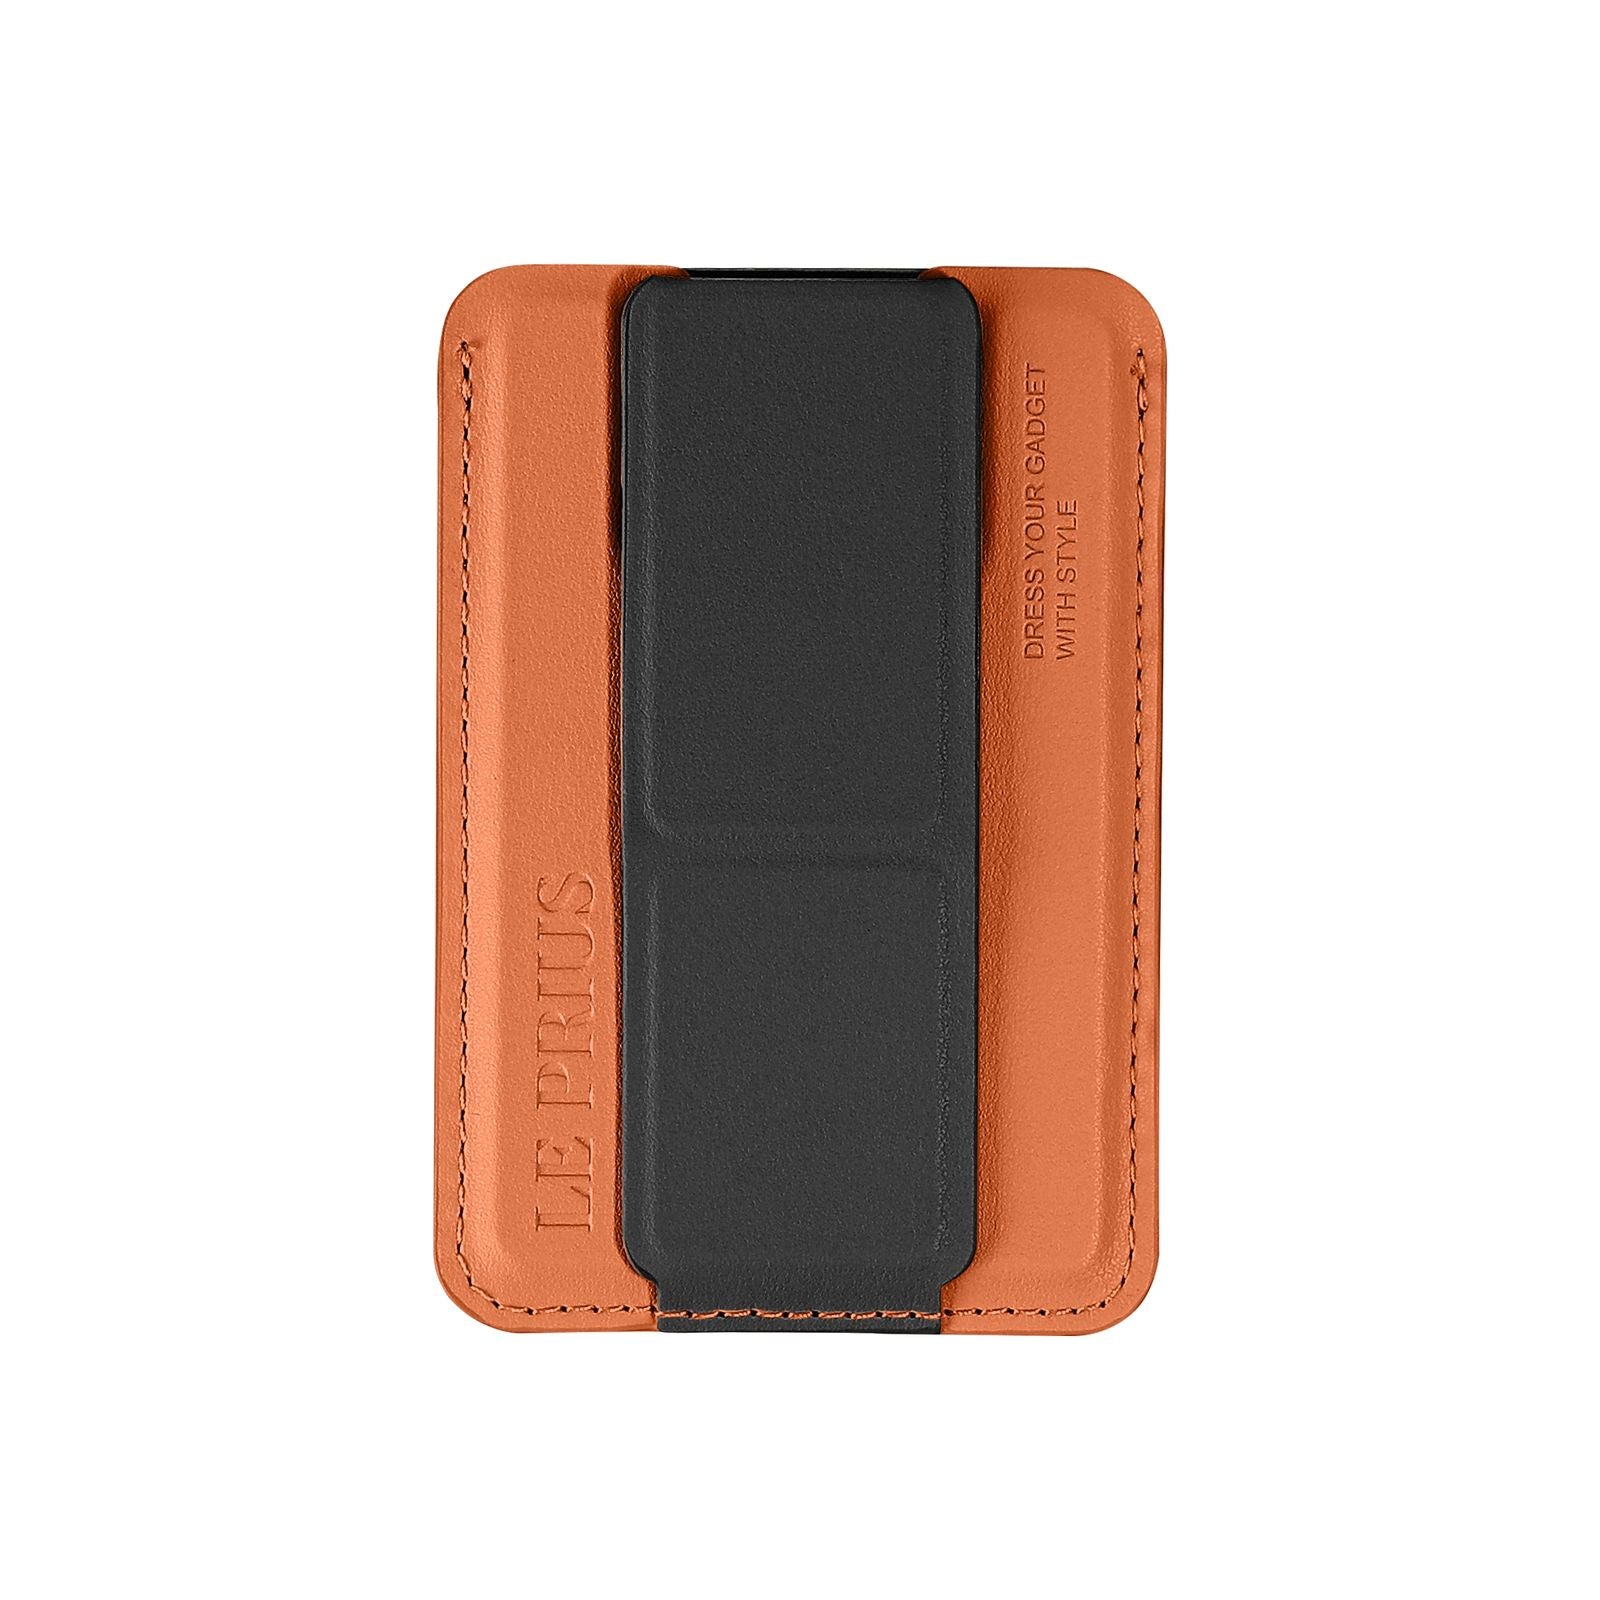 LE PRIUS Bengal Series, Magnetic Card Holder With Grip And Extendable Smart stand - Orange